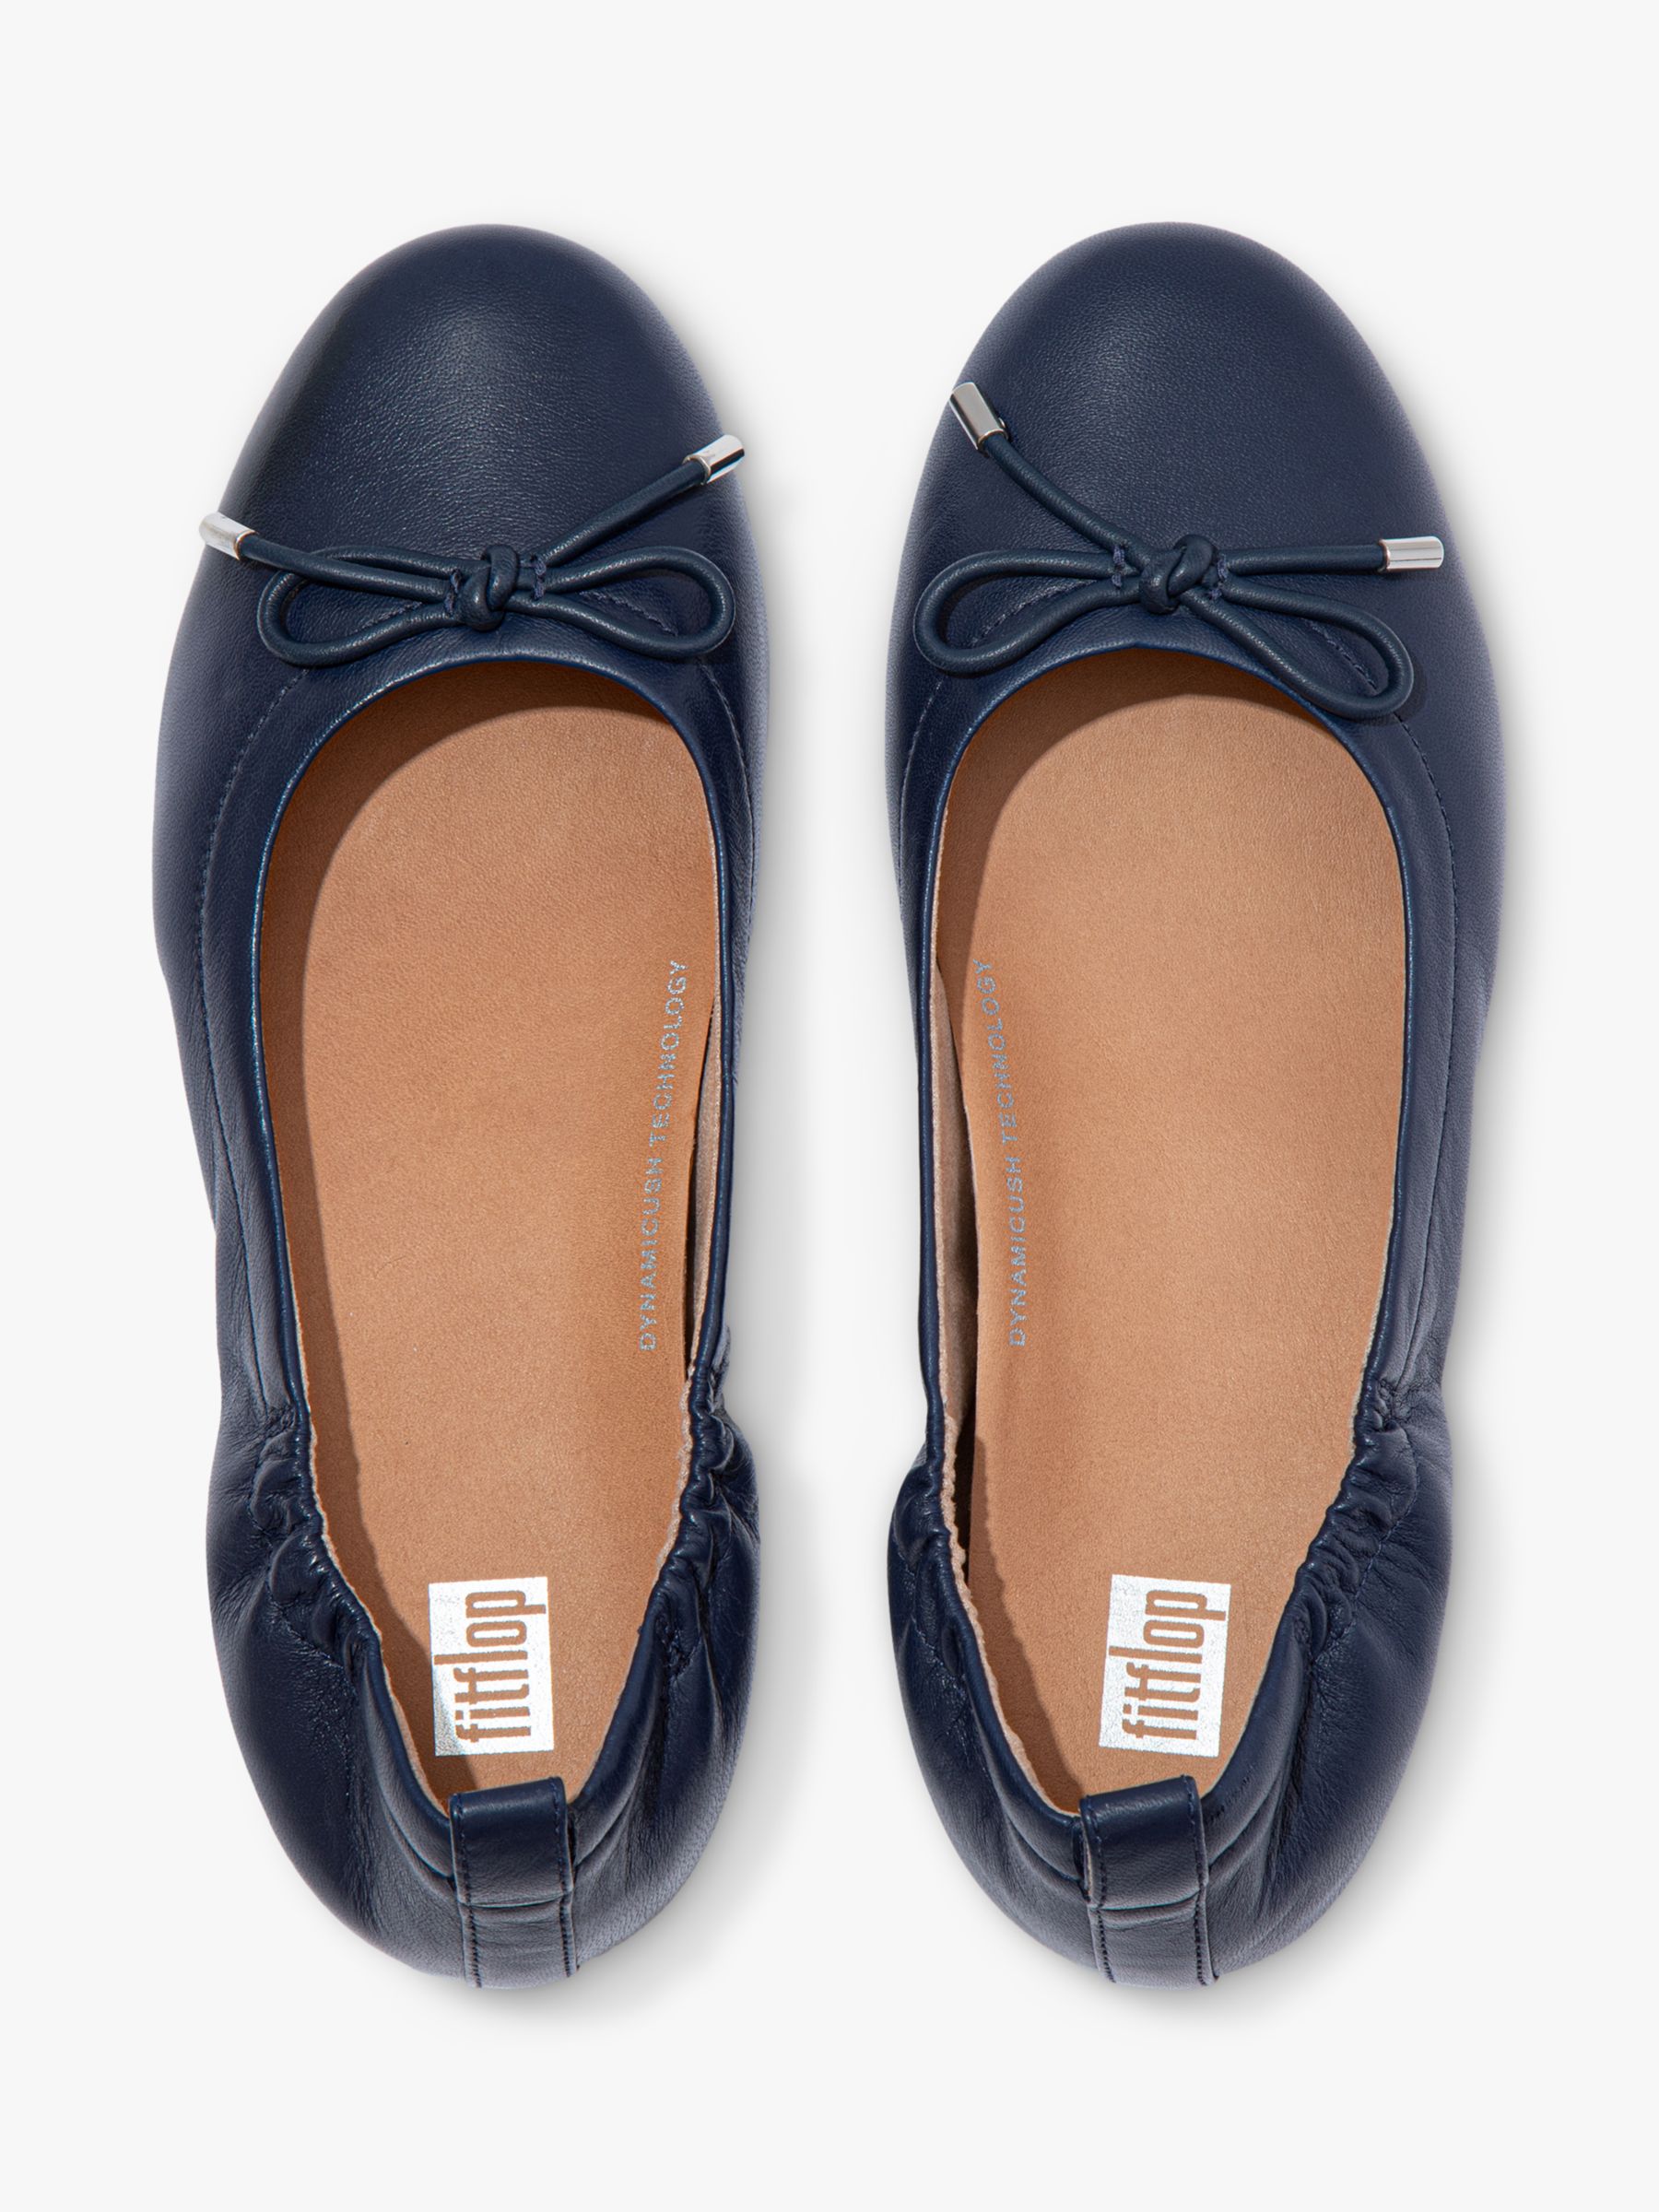 FitFlop Allegro Bow Leather Pumps, Midnight Navy at John Lewis & Partners